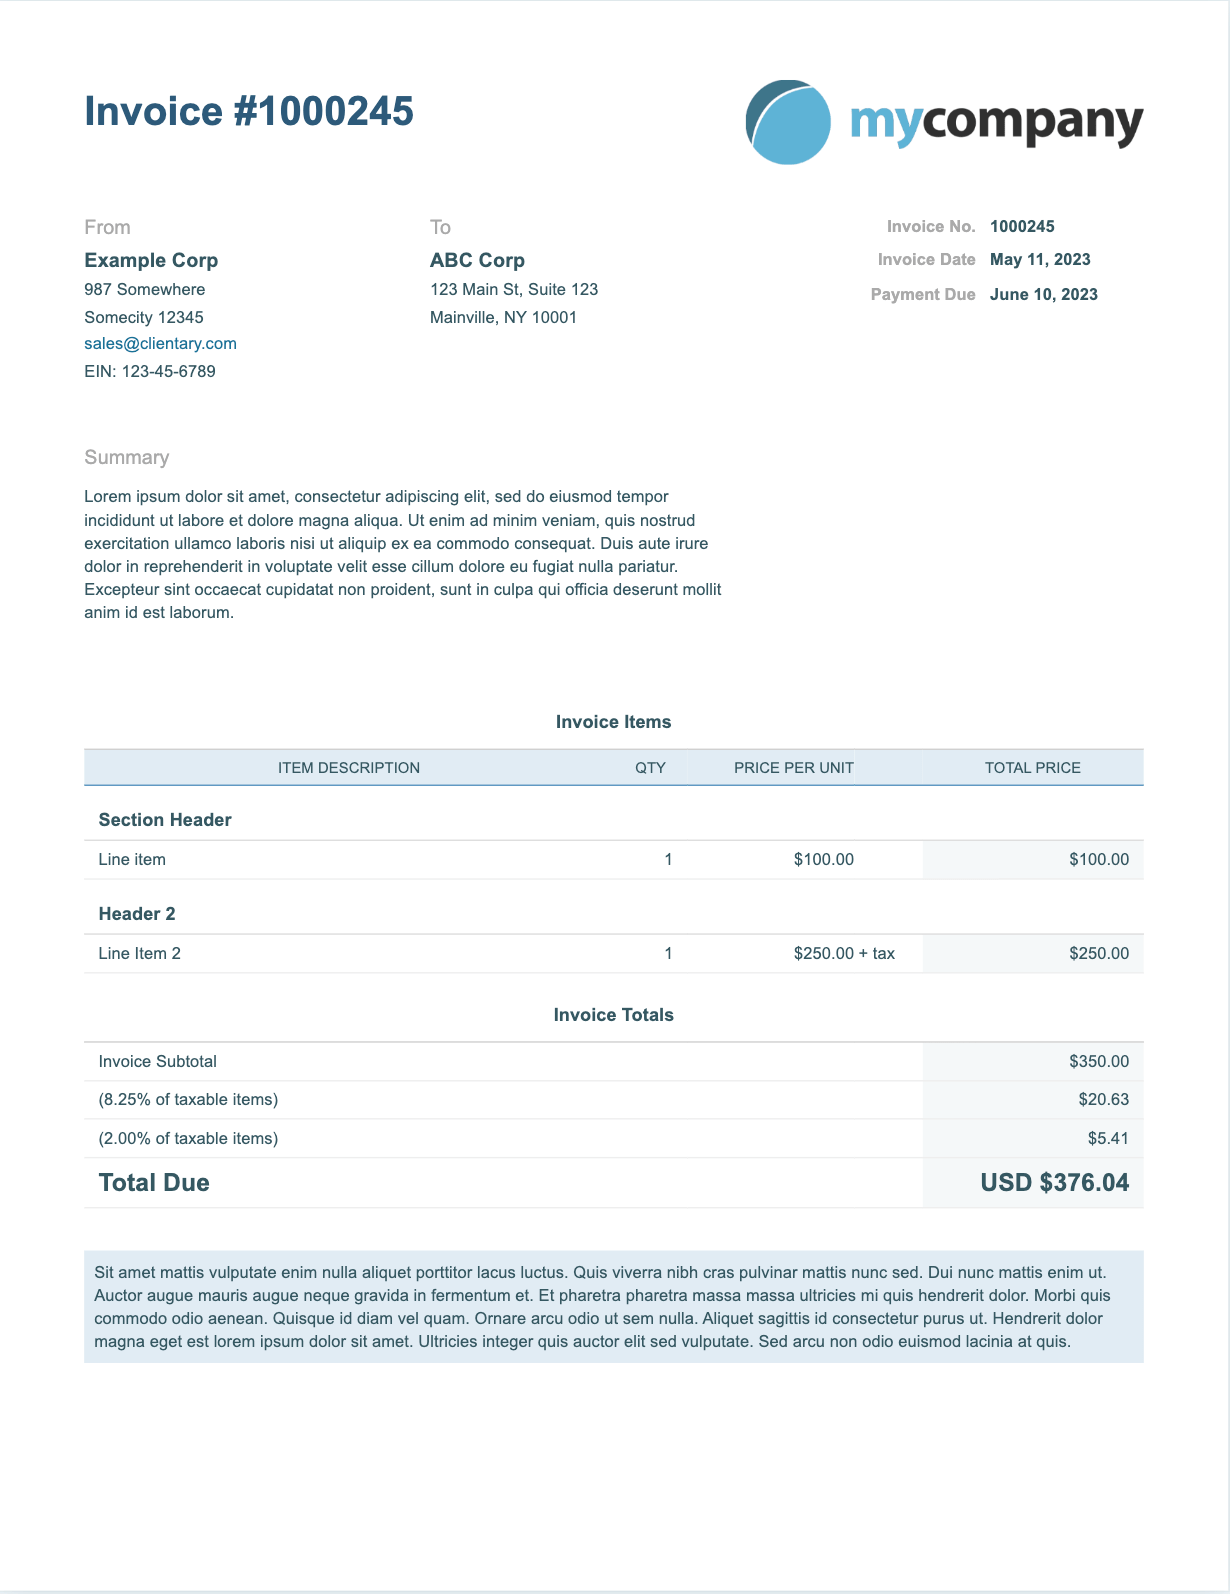 The Spartan theme presents your invoices and estimates with a design that is minimalistic. The design emphasizes efficient use of space and presents information in a condensed format.